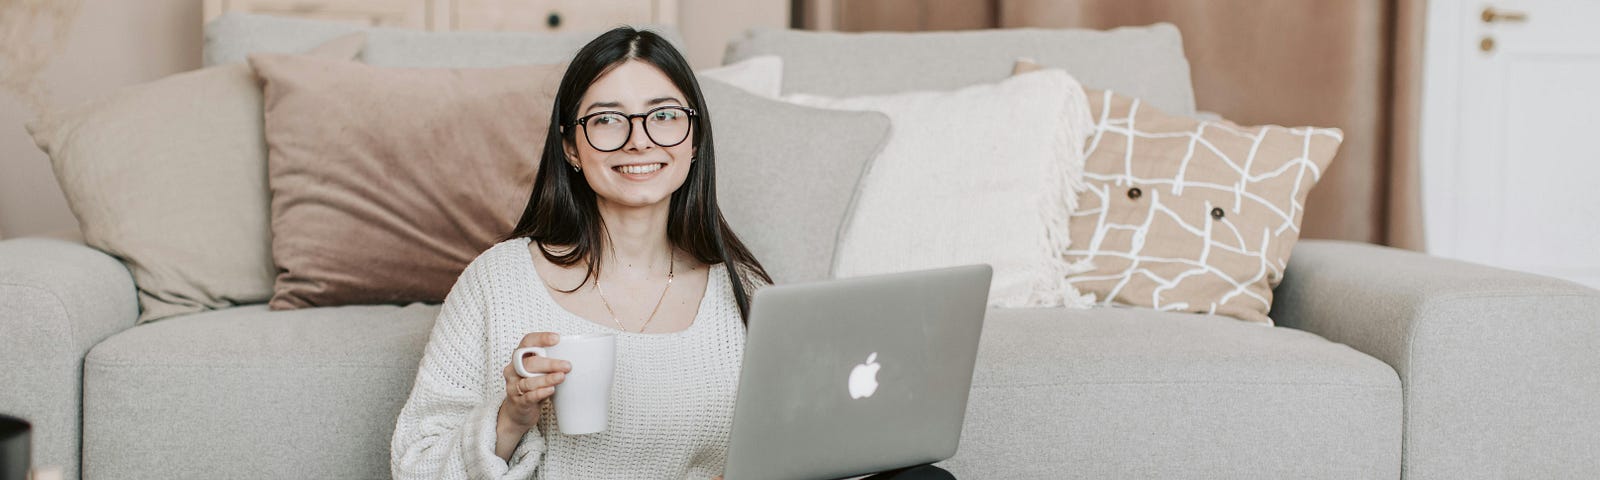 Cheerful woman using laptop at home